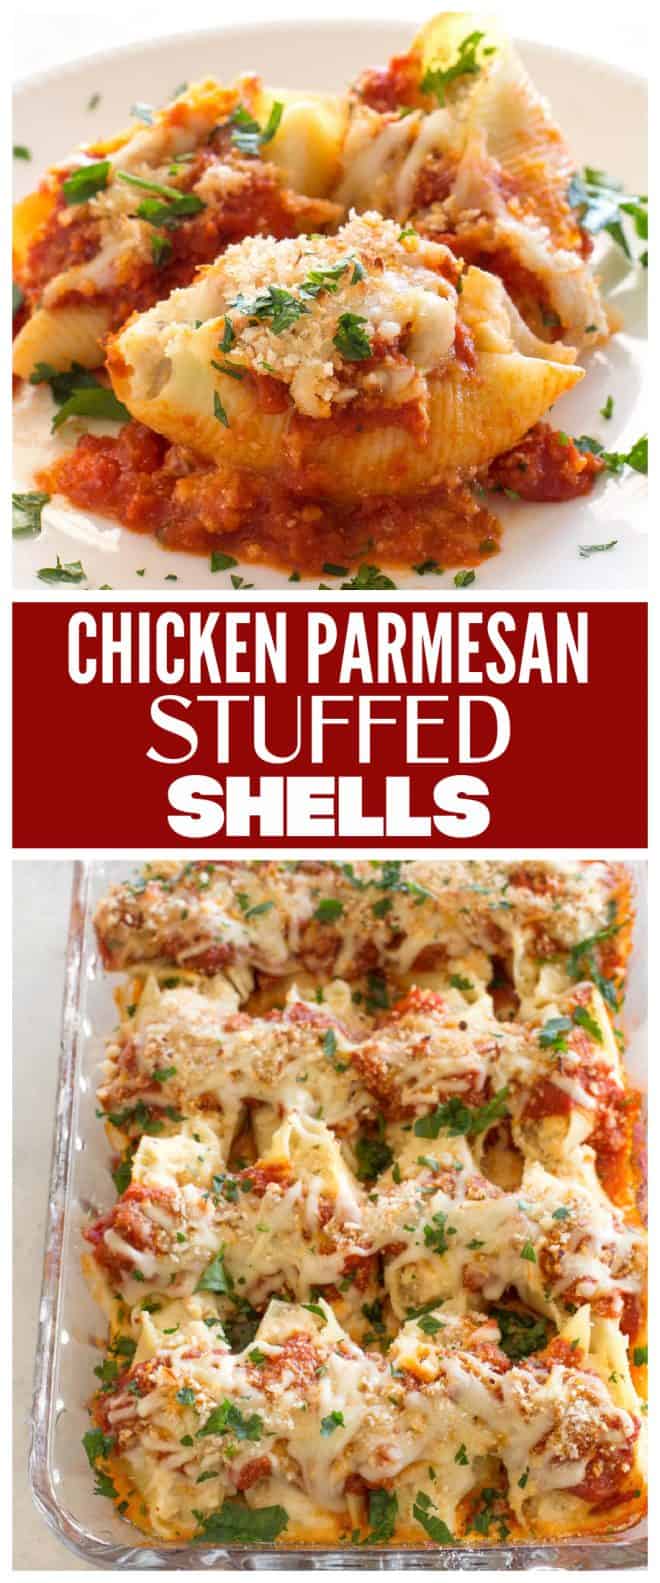 Chicken Parmesan Stuffed Shells - creamy ricotta filling with chicken topped with a crunchy Panko topping. #chicken #parmesan #stuffed #shells #dinner #recipe